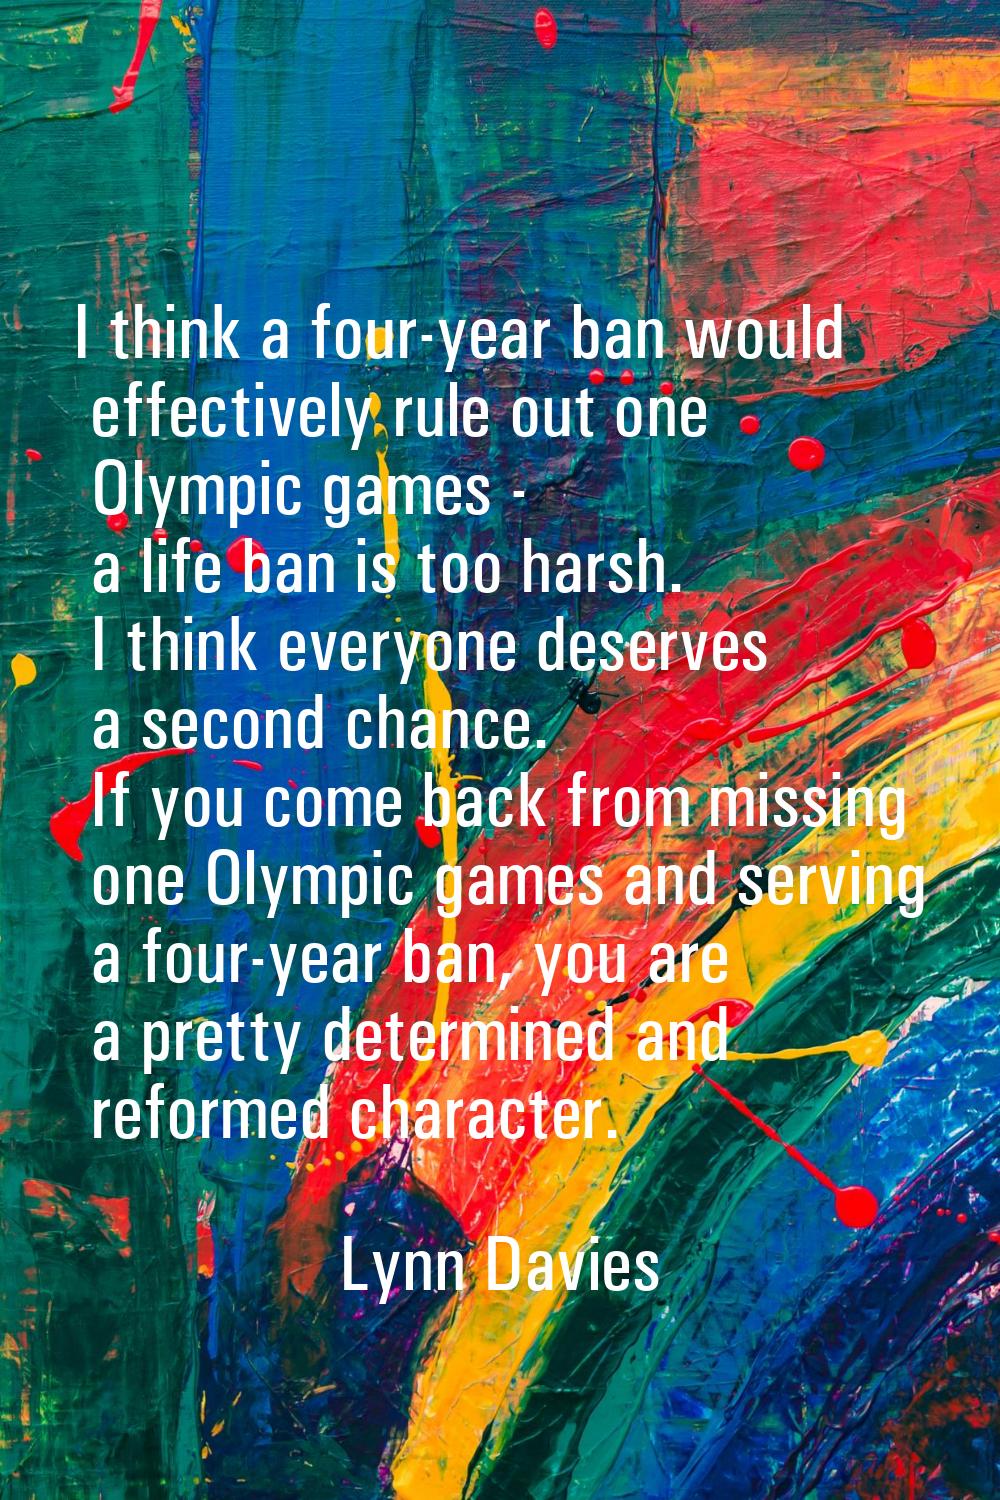 I think a four-year ban would effectively rule out one Olympic games - a life ban is too harsh. I t